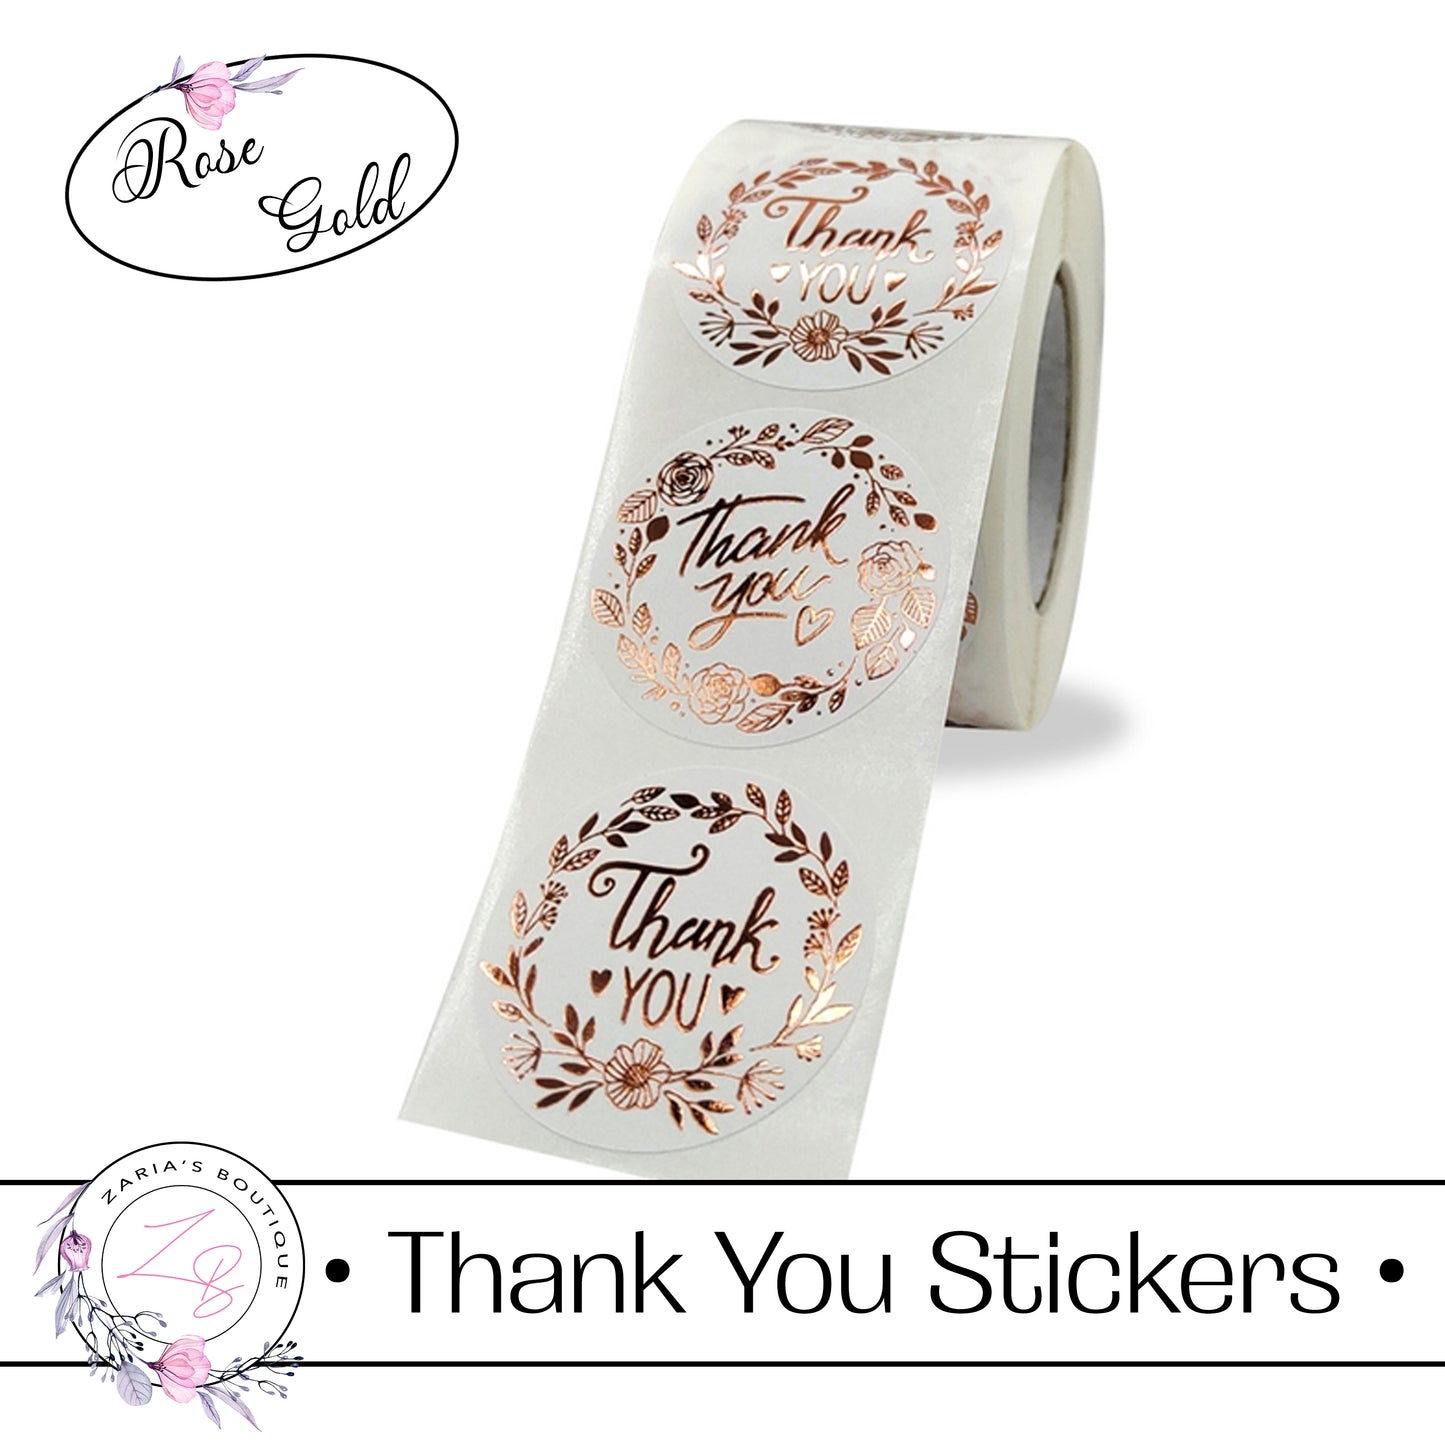 ⋅ Thank You Stickers ⋅ ROSE GOLD ⋅ Small Business Packaging 20 50 or 500 pieces